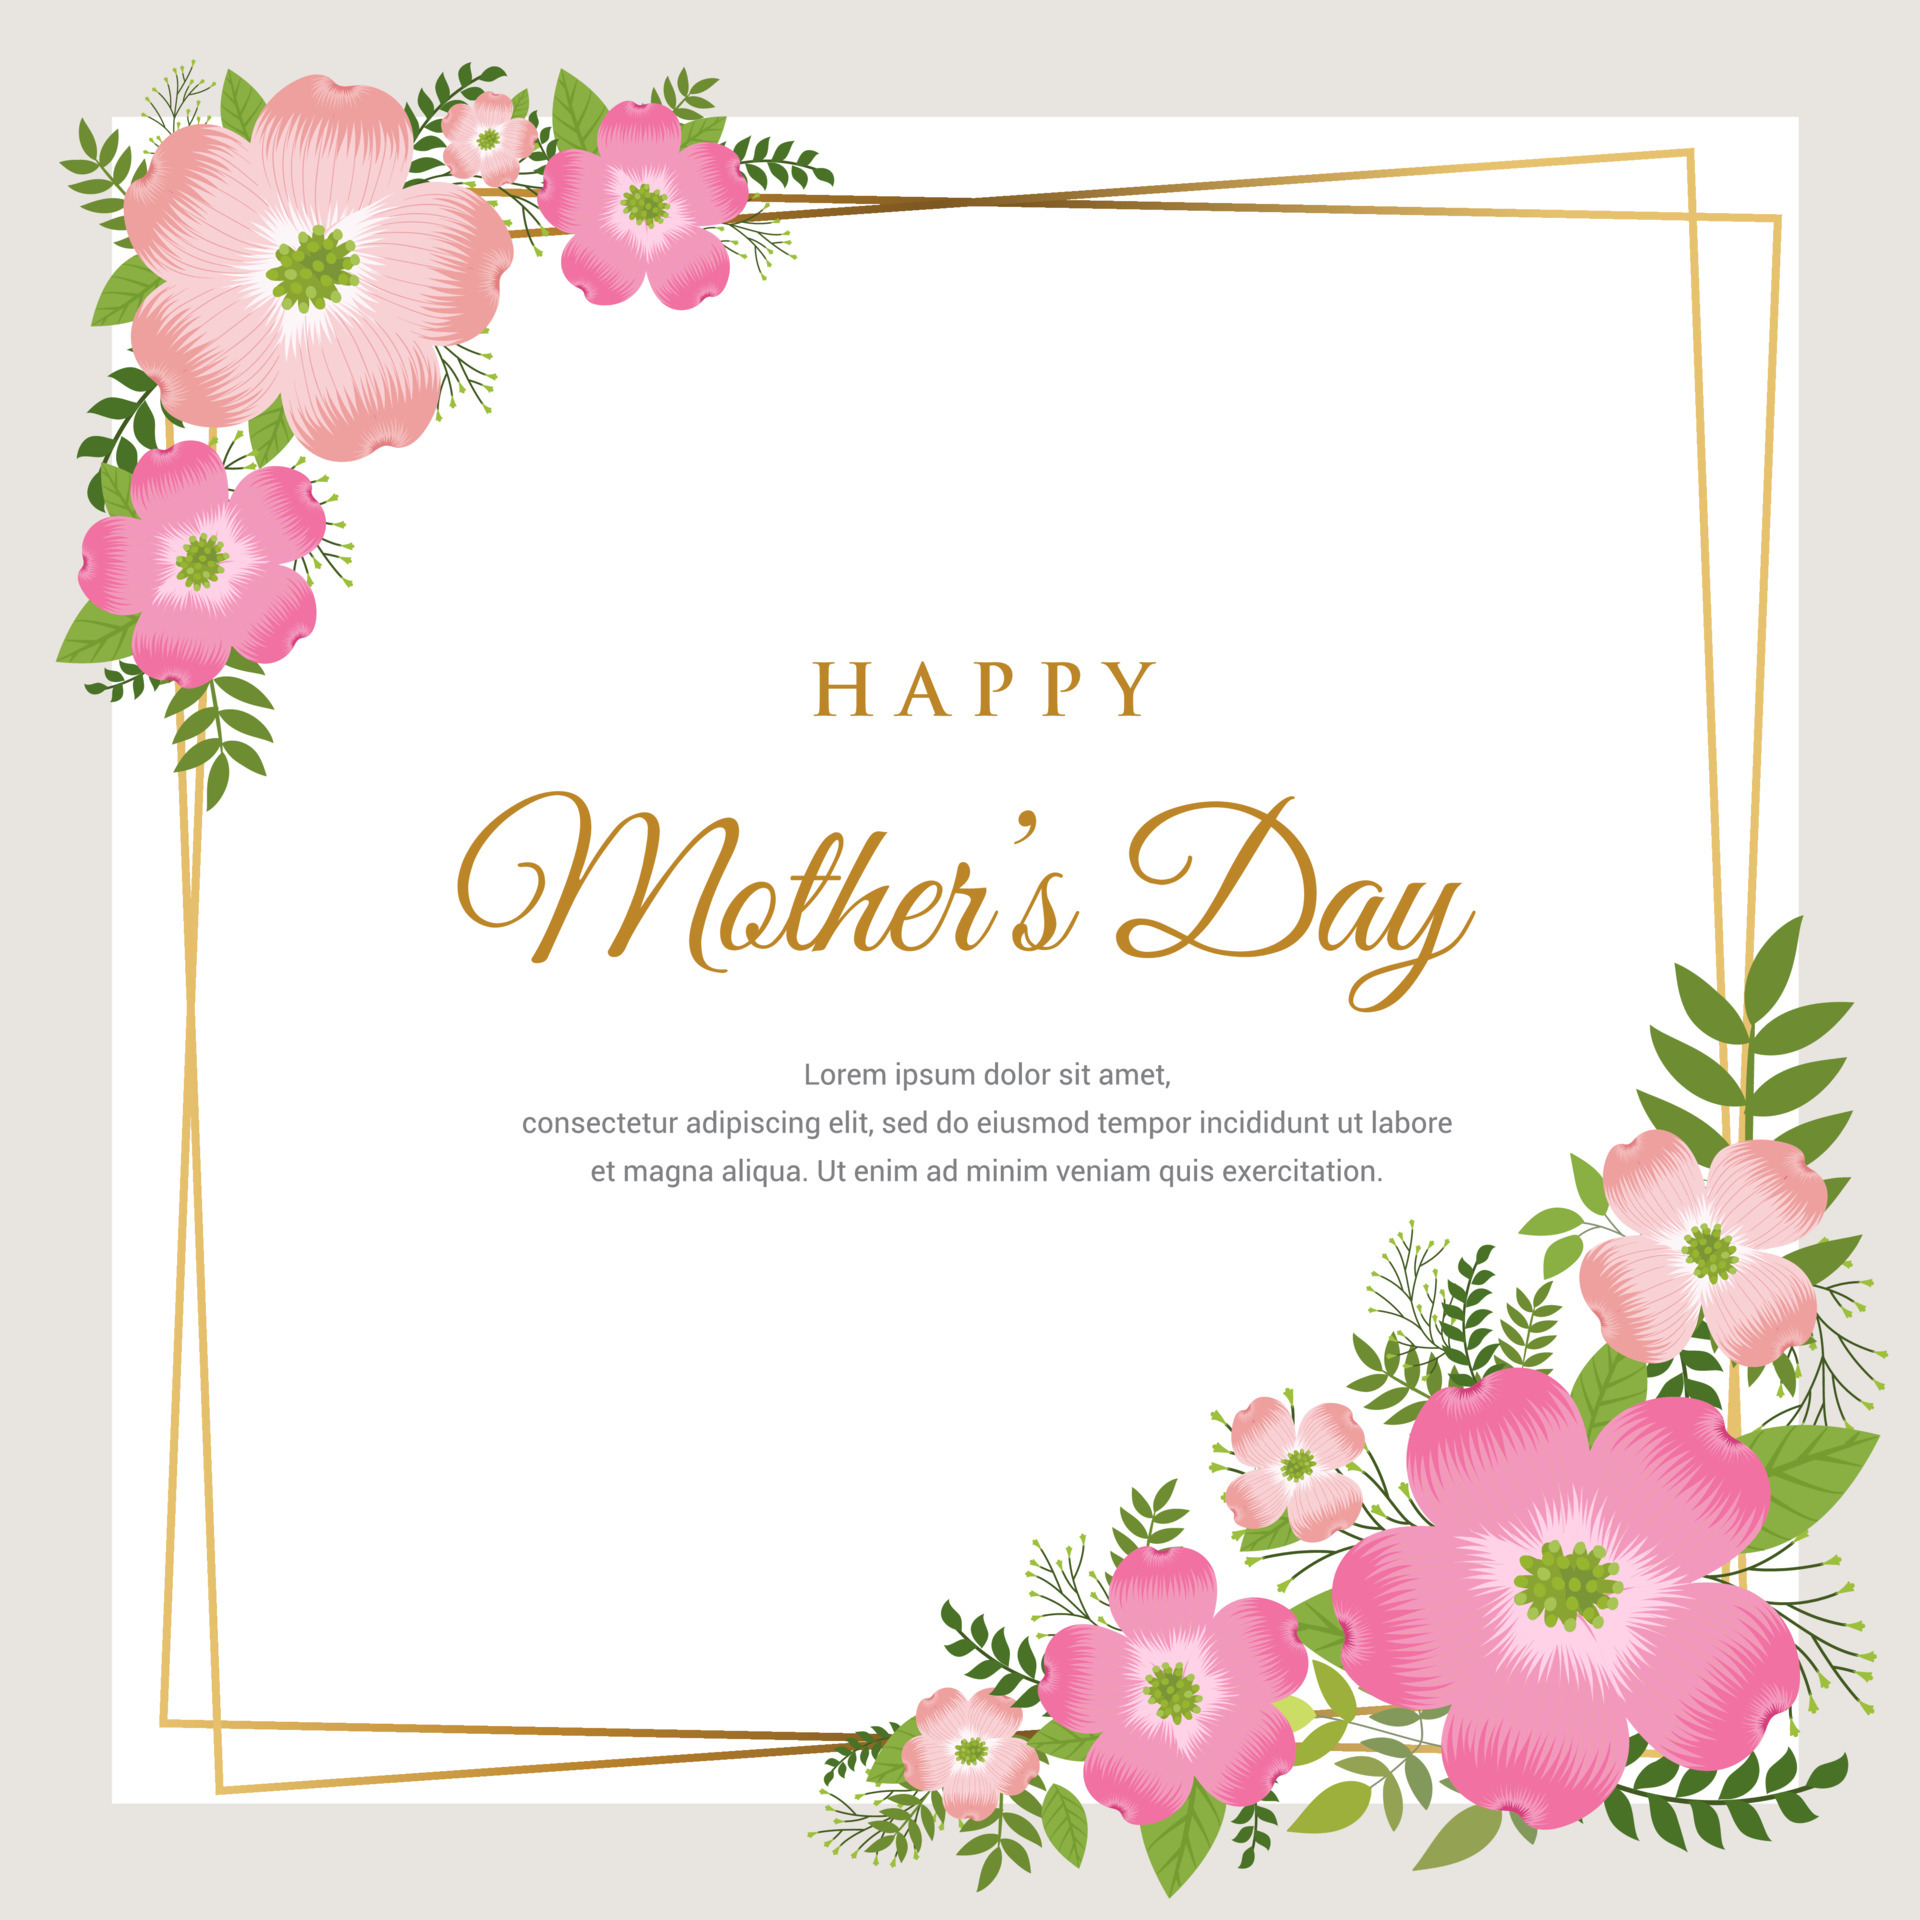 Best Happy Mother's Day Messages and Quotes for Friends - Lola Lambchops